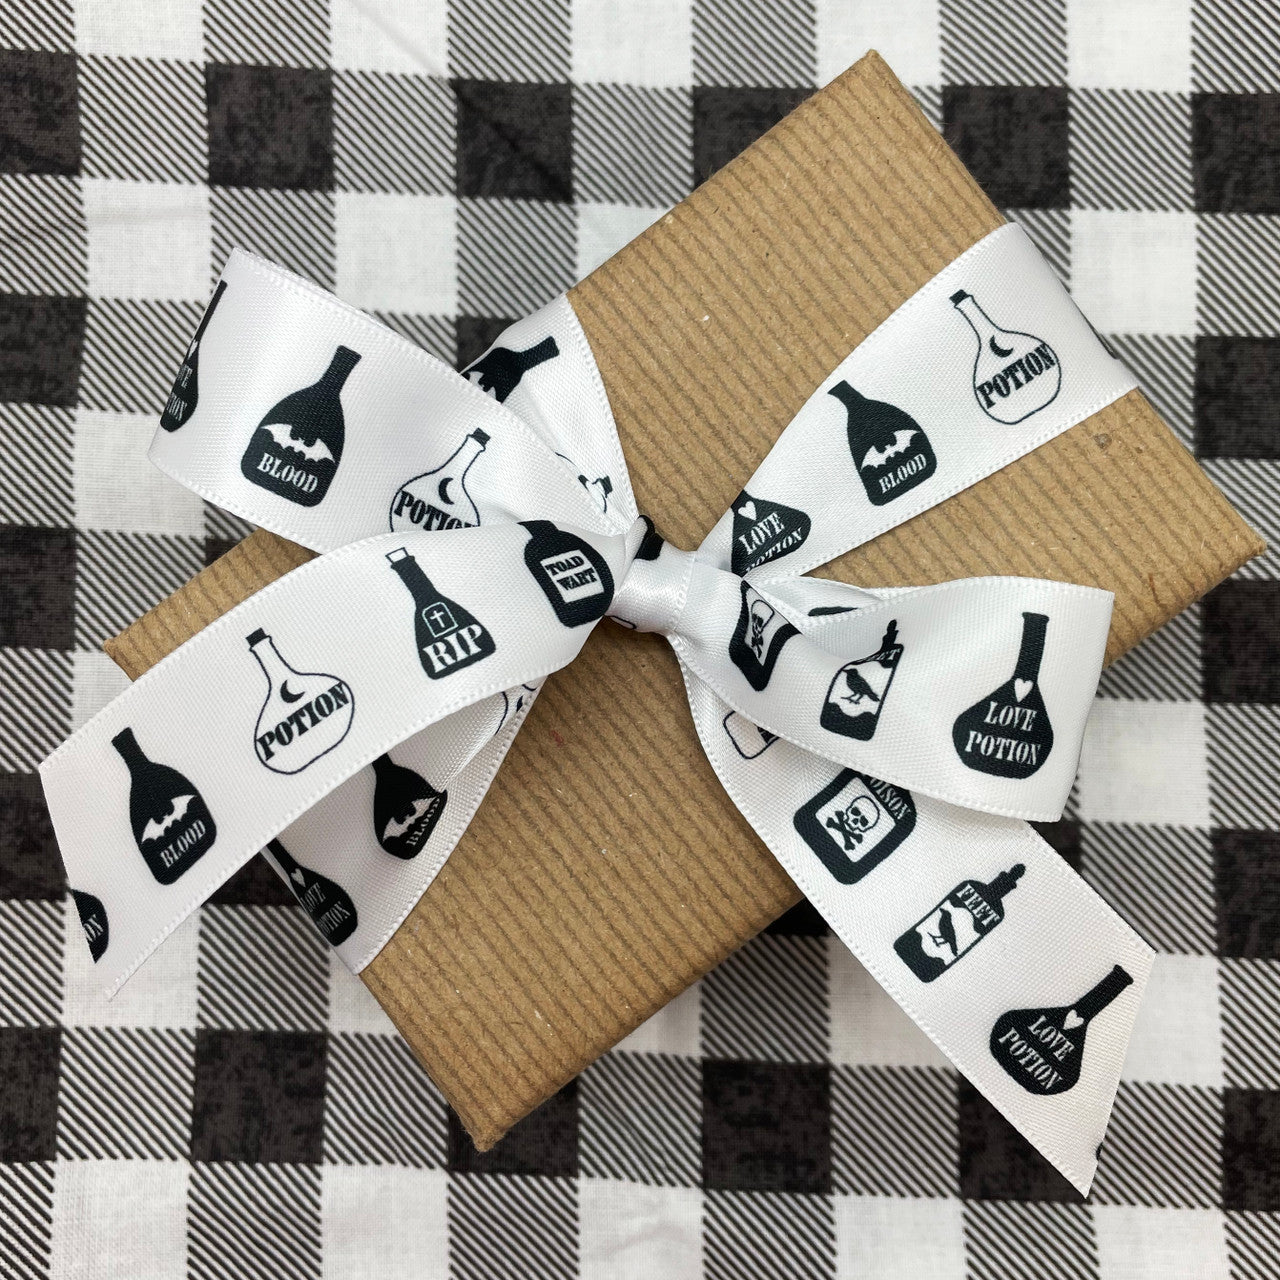 Tie a pretty bow with our black and white potion bottle ribbon for beautiful gift wrap and favors!